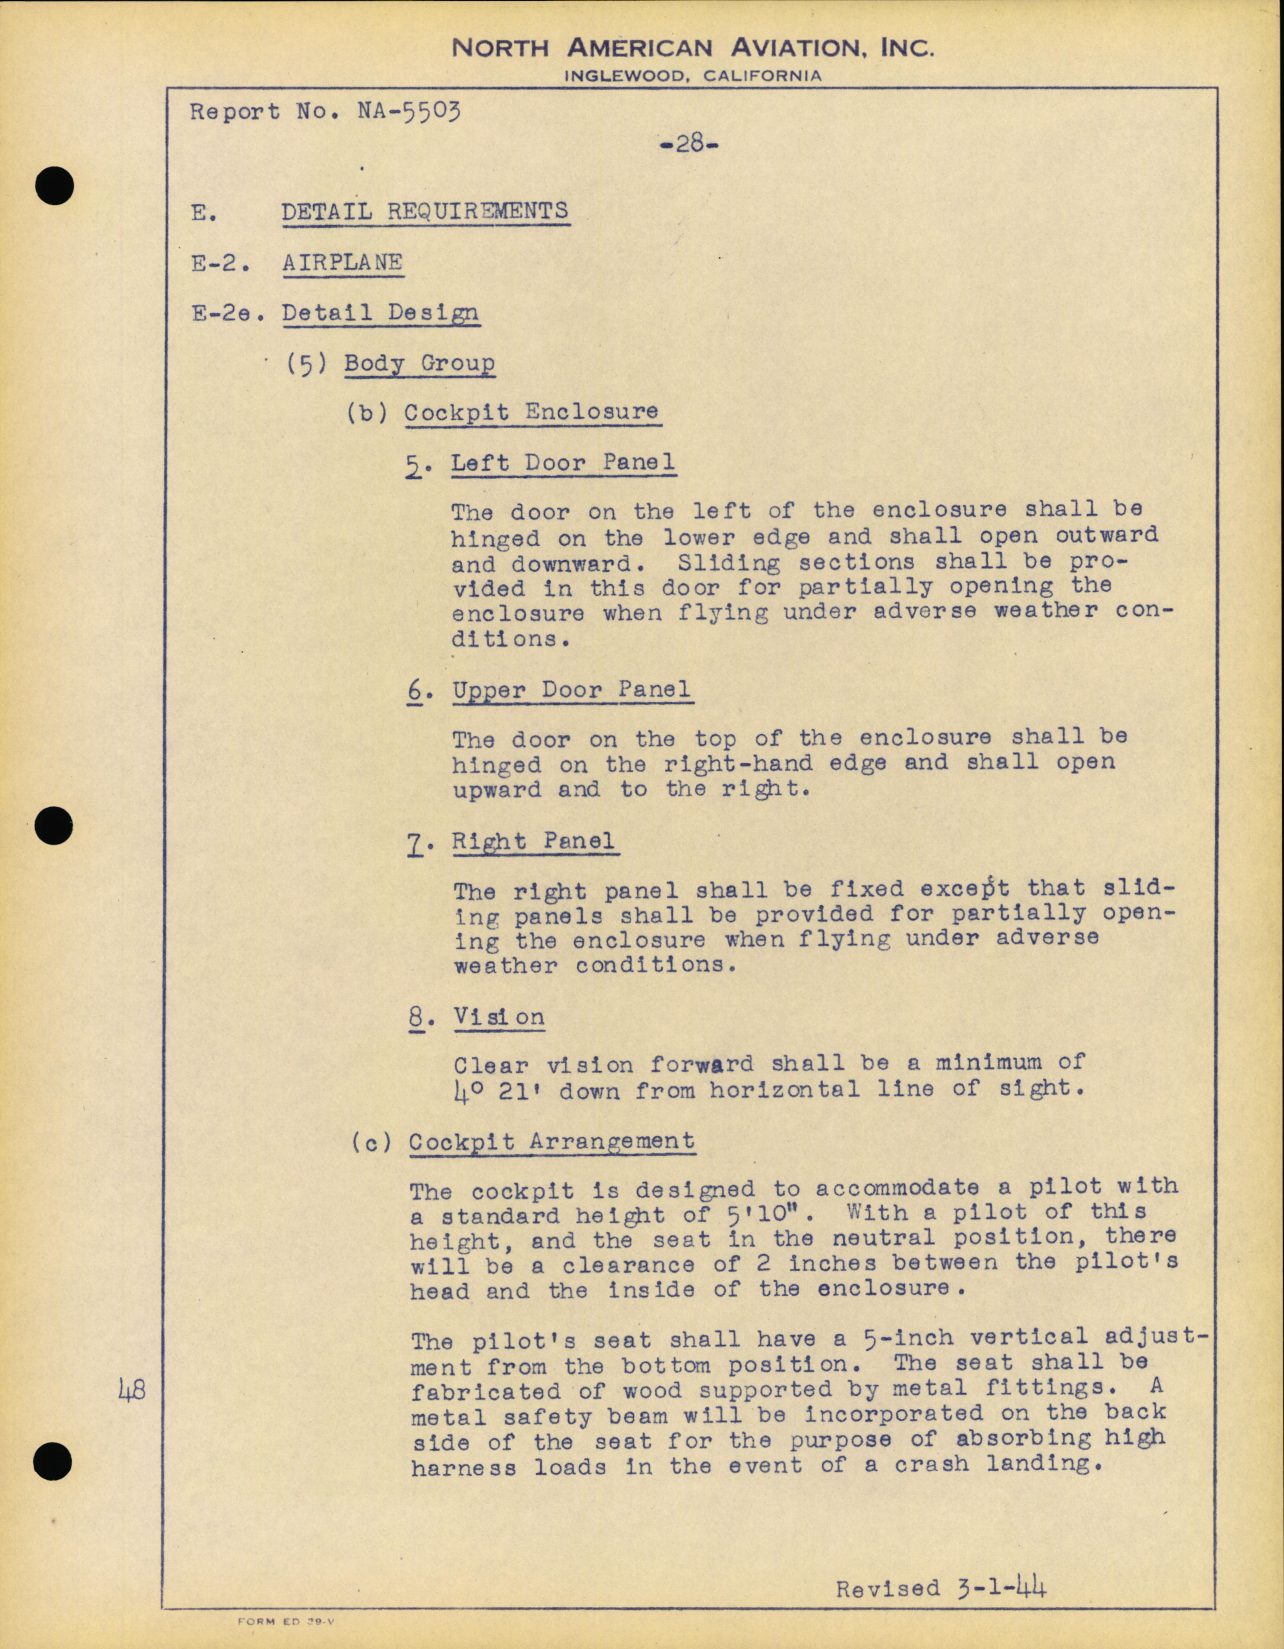 Sample page 38 from AirCorps Library document: Model Specifications for P-51B-1-NA (North American Engineering Dept)